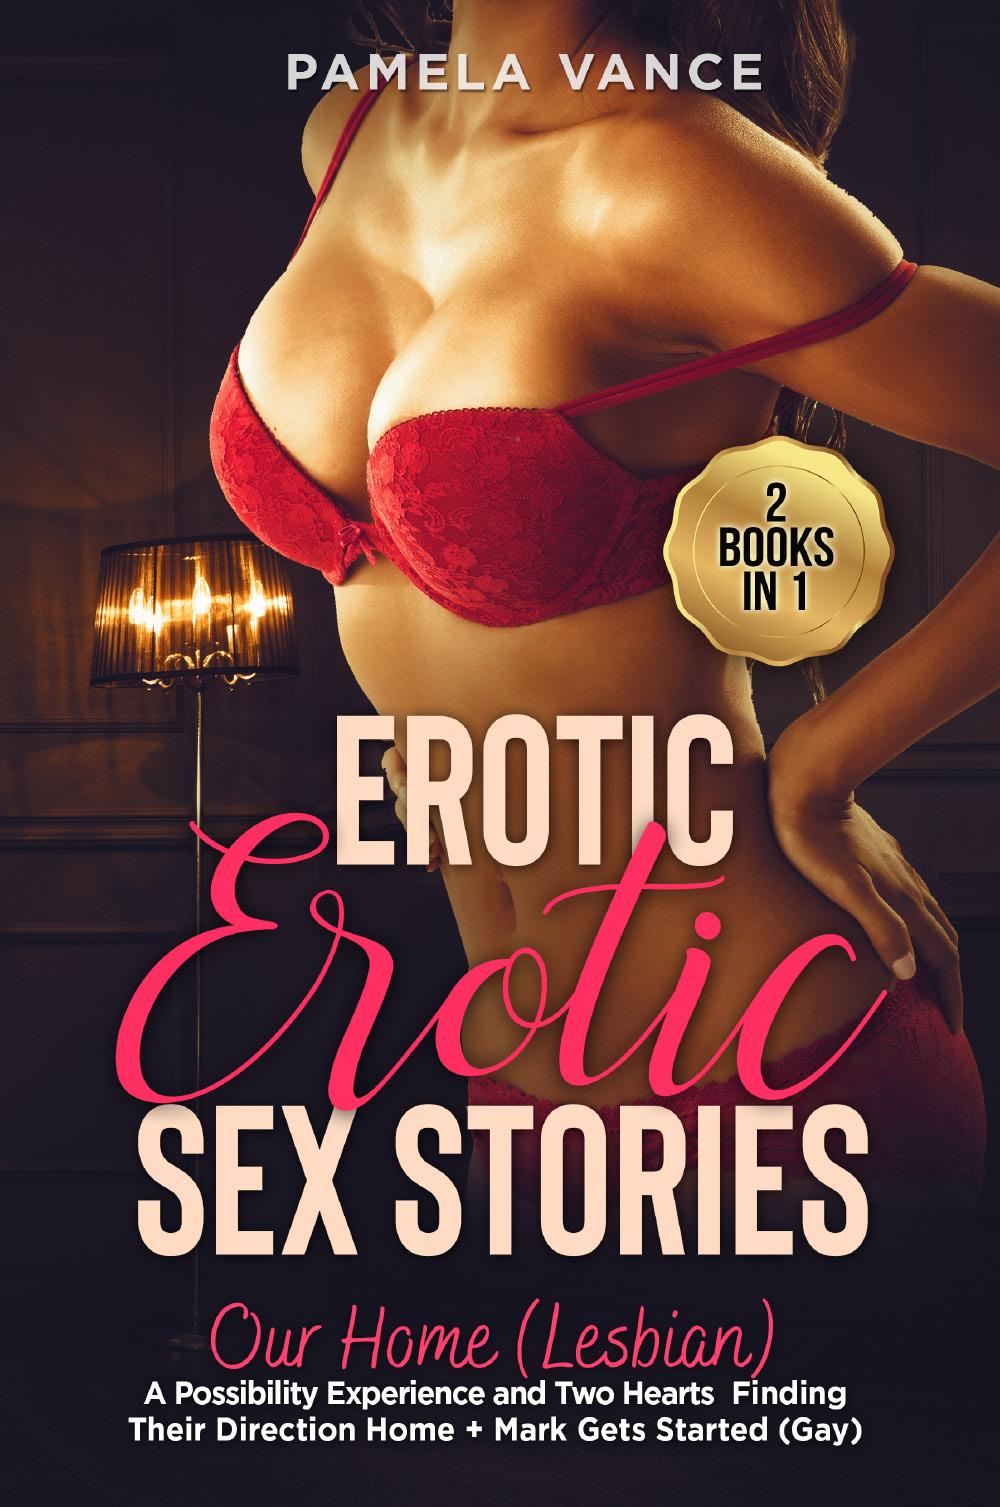 Explicit Erotic Sex Stories (2 Books in 1) Our Hоmе (Lesbian)